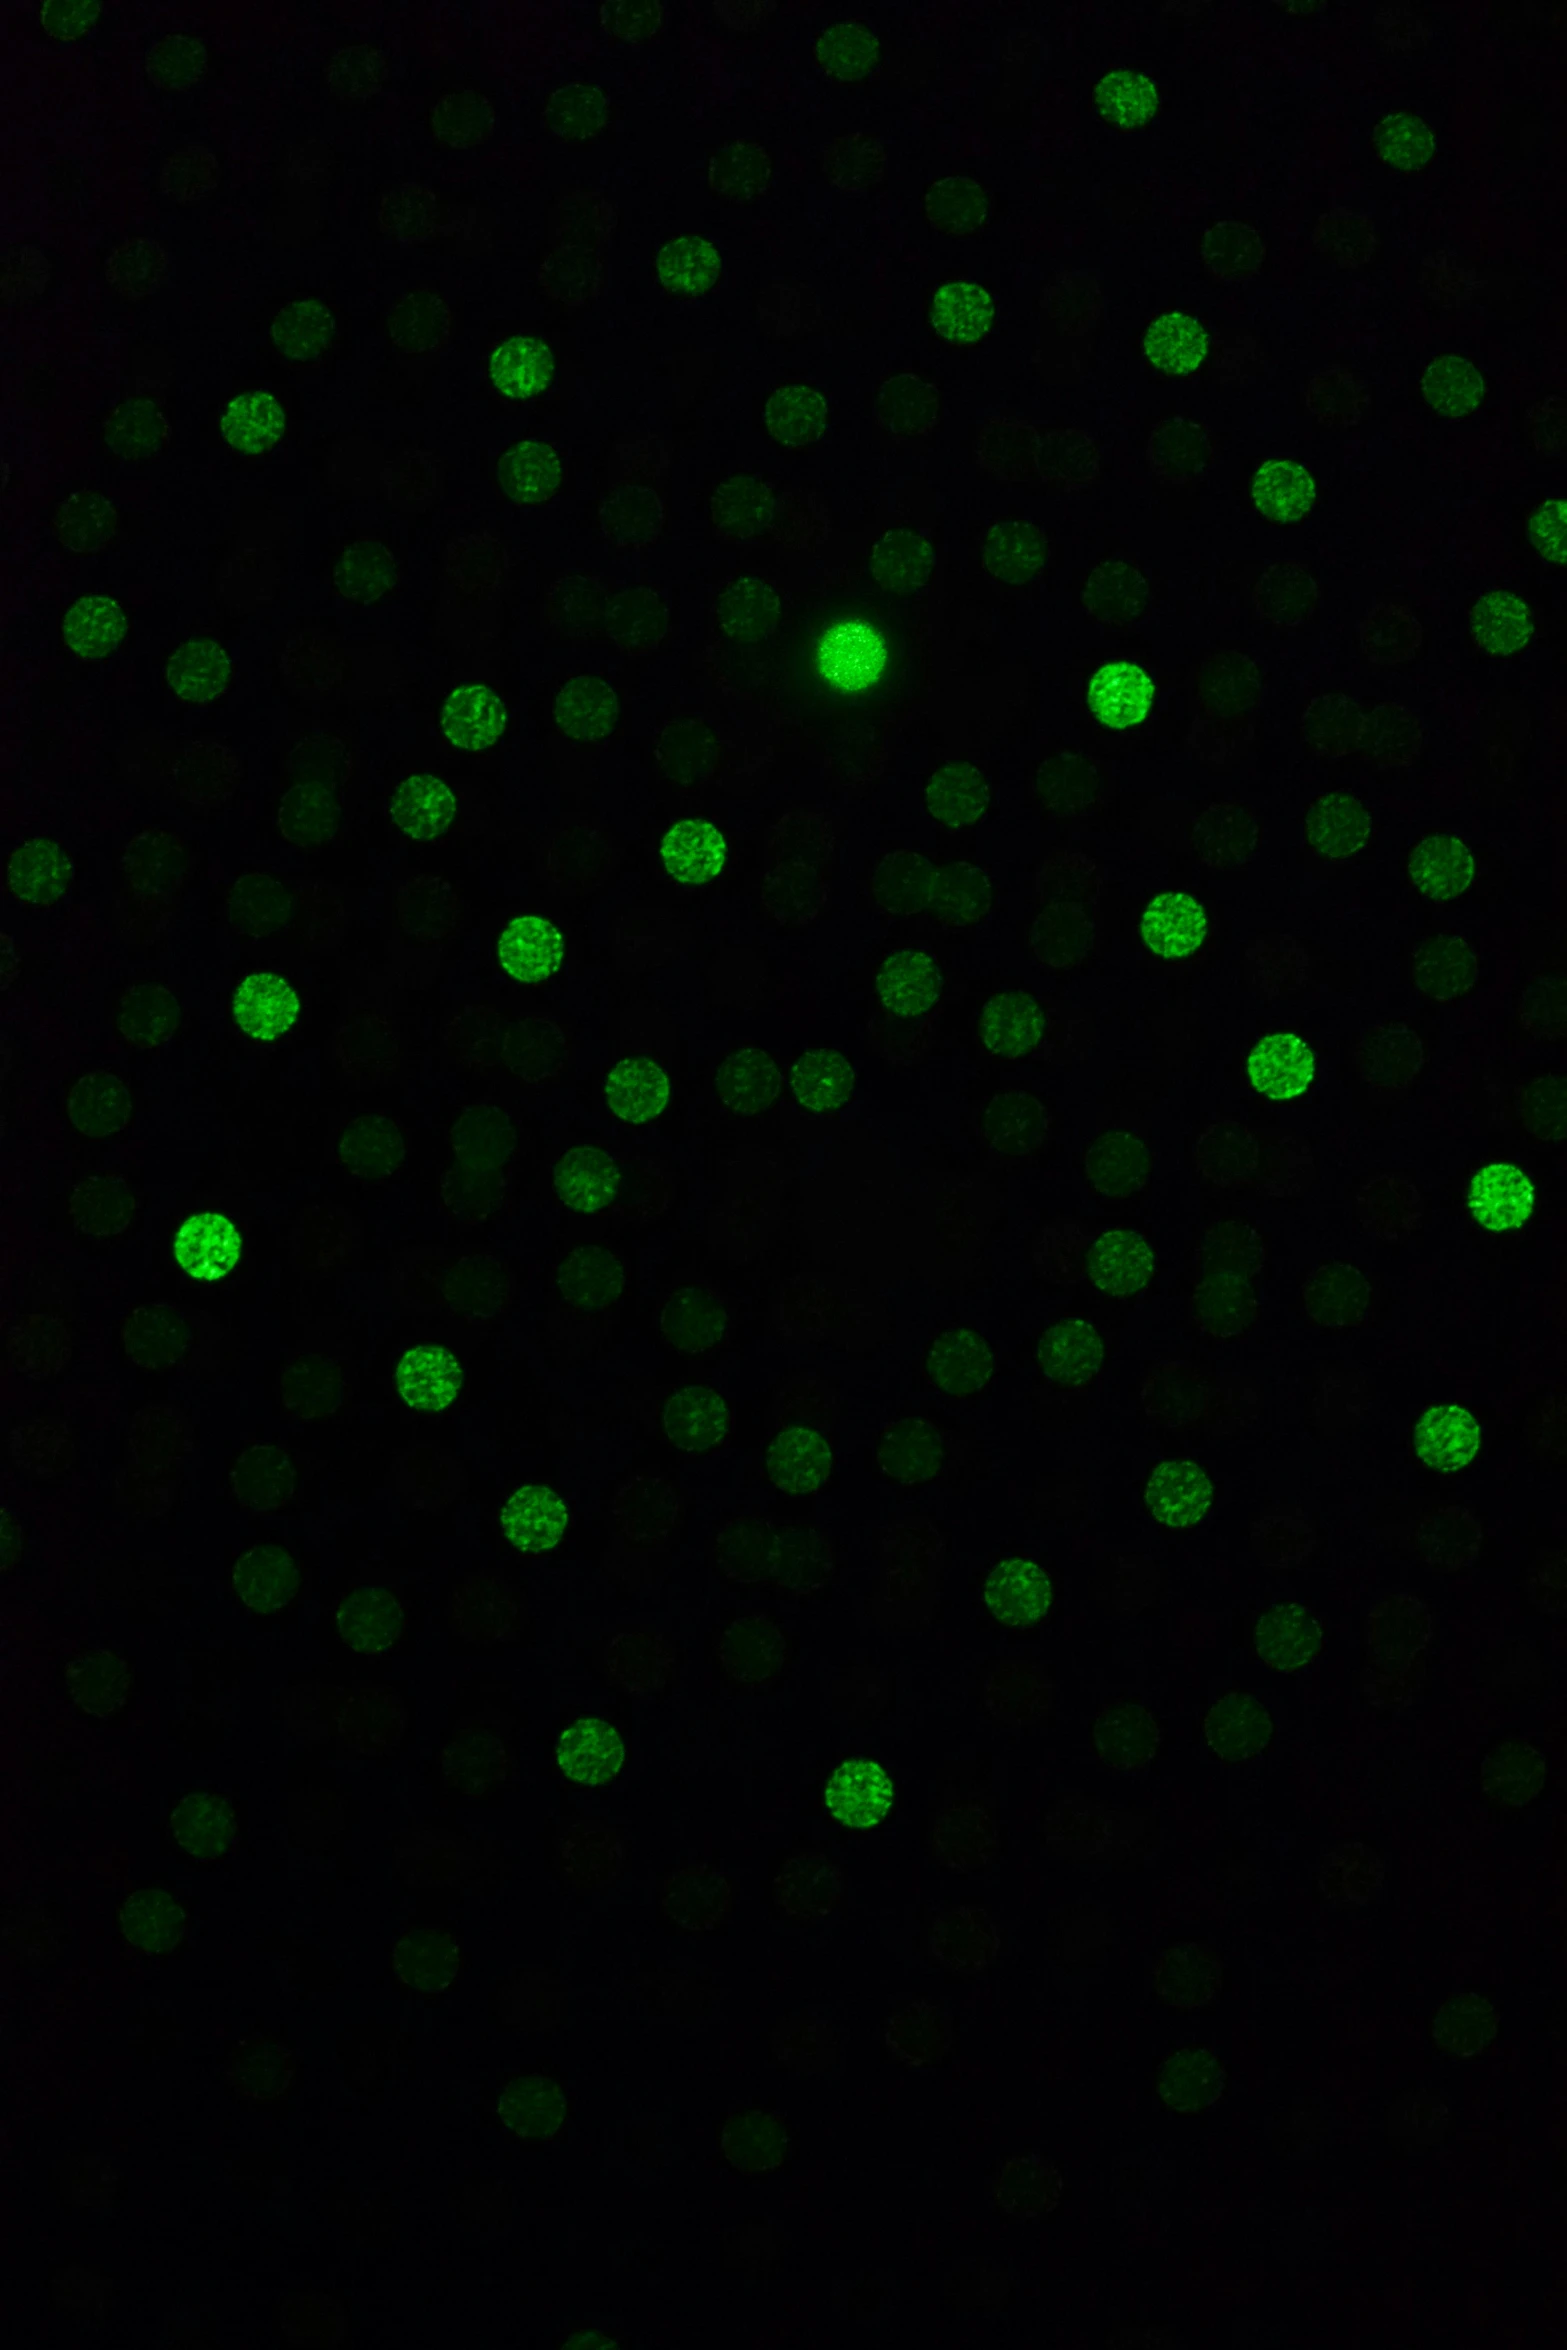 some green lights on a black background